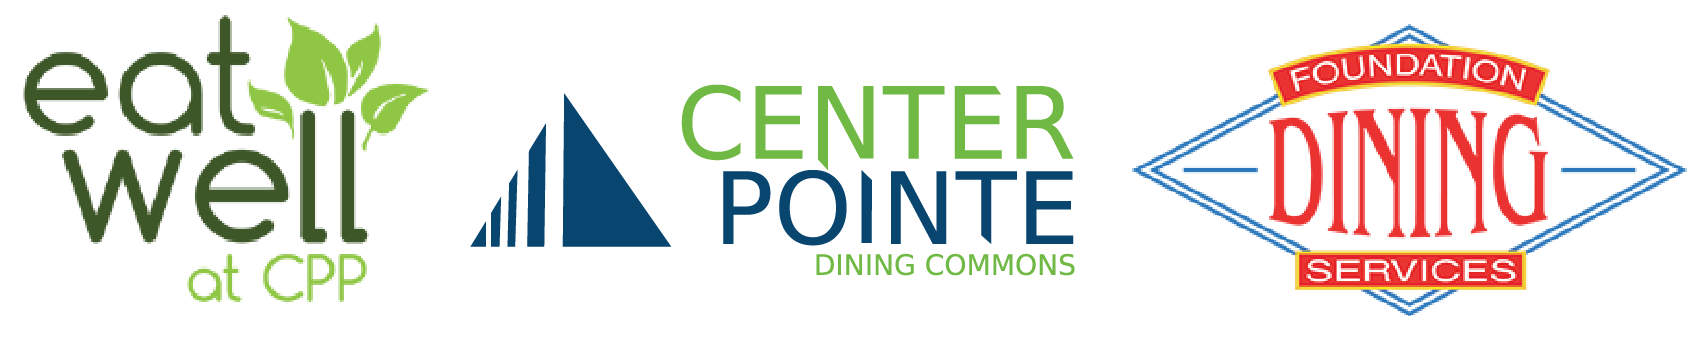 eat well at cpp. centerpointe dining commons. foundation dining services